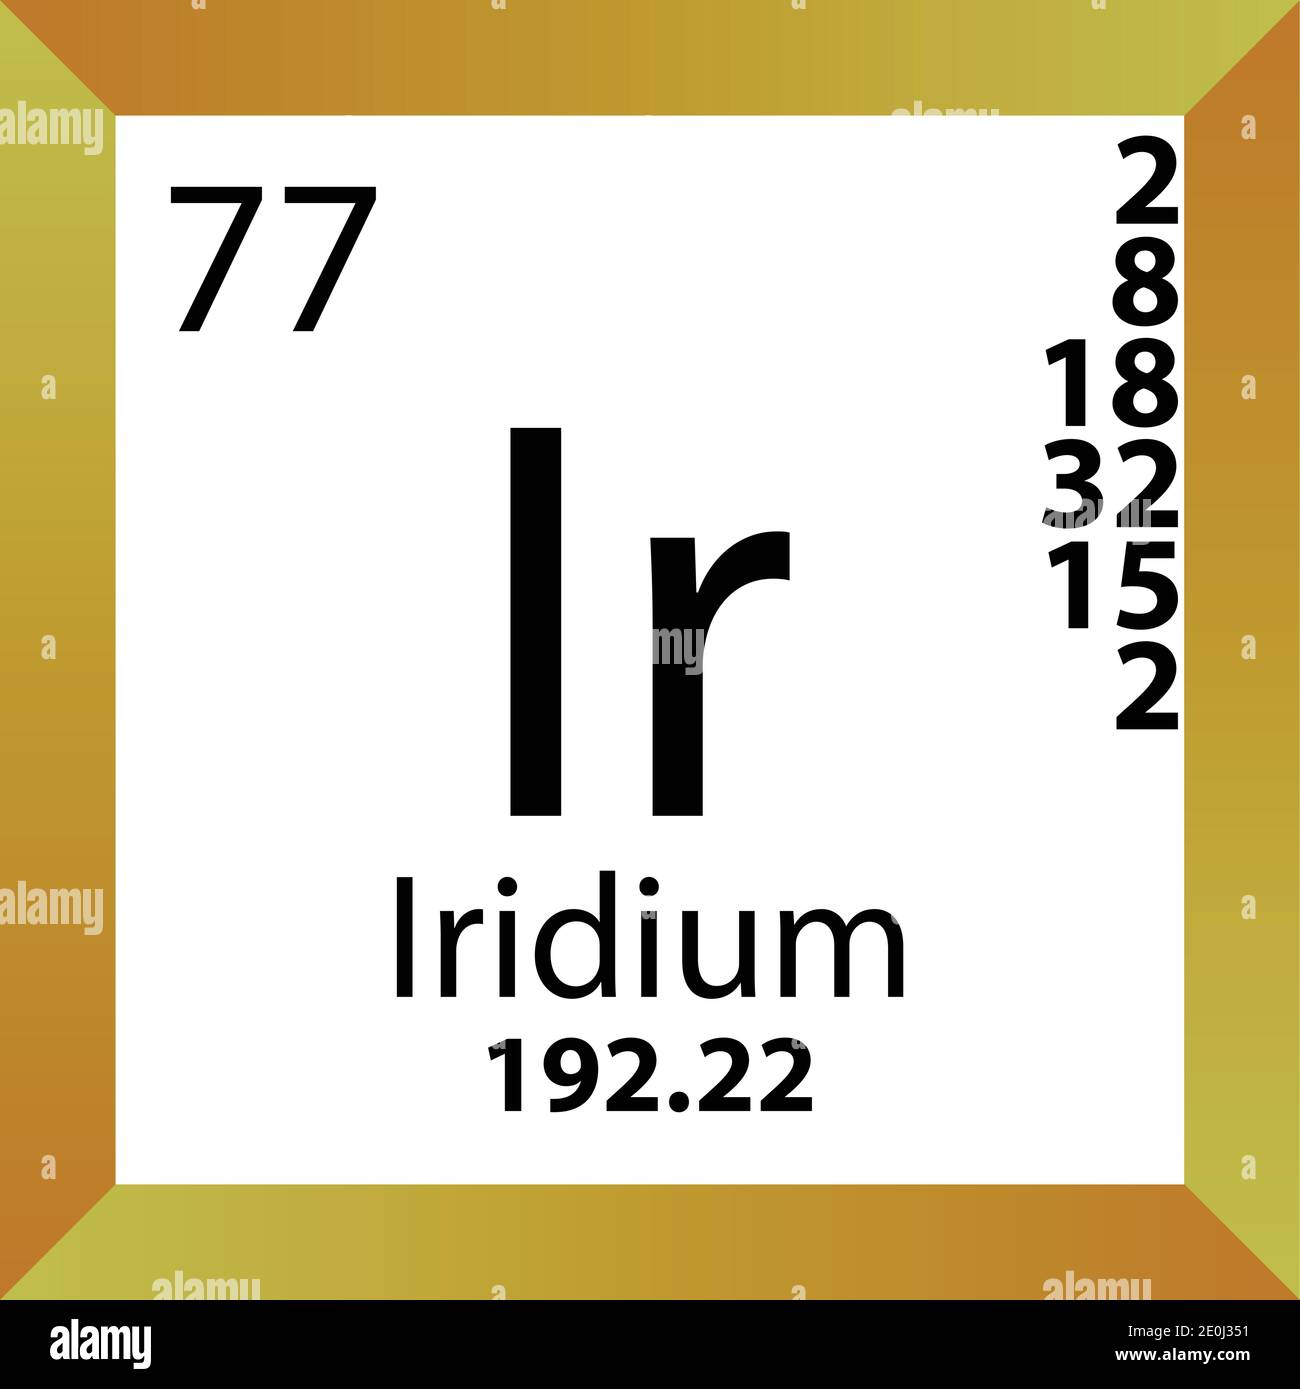 Ir Iridium Chemical Element Periodic Table. Single vector illustration, colorful Icon with molar mass, electron conf. and atomic number. Stock Vector